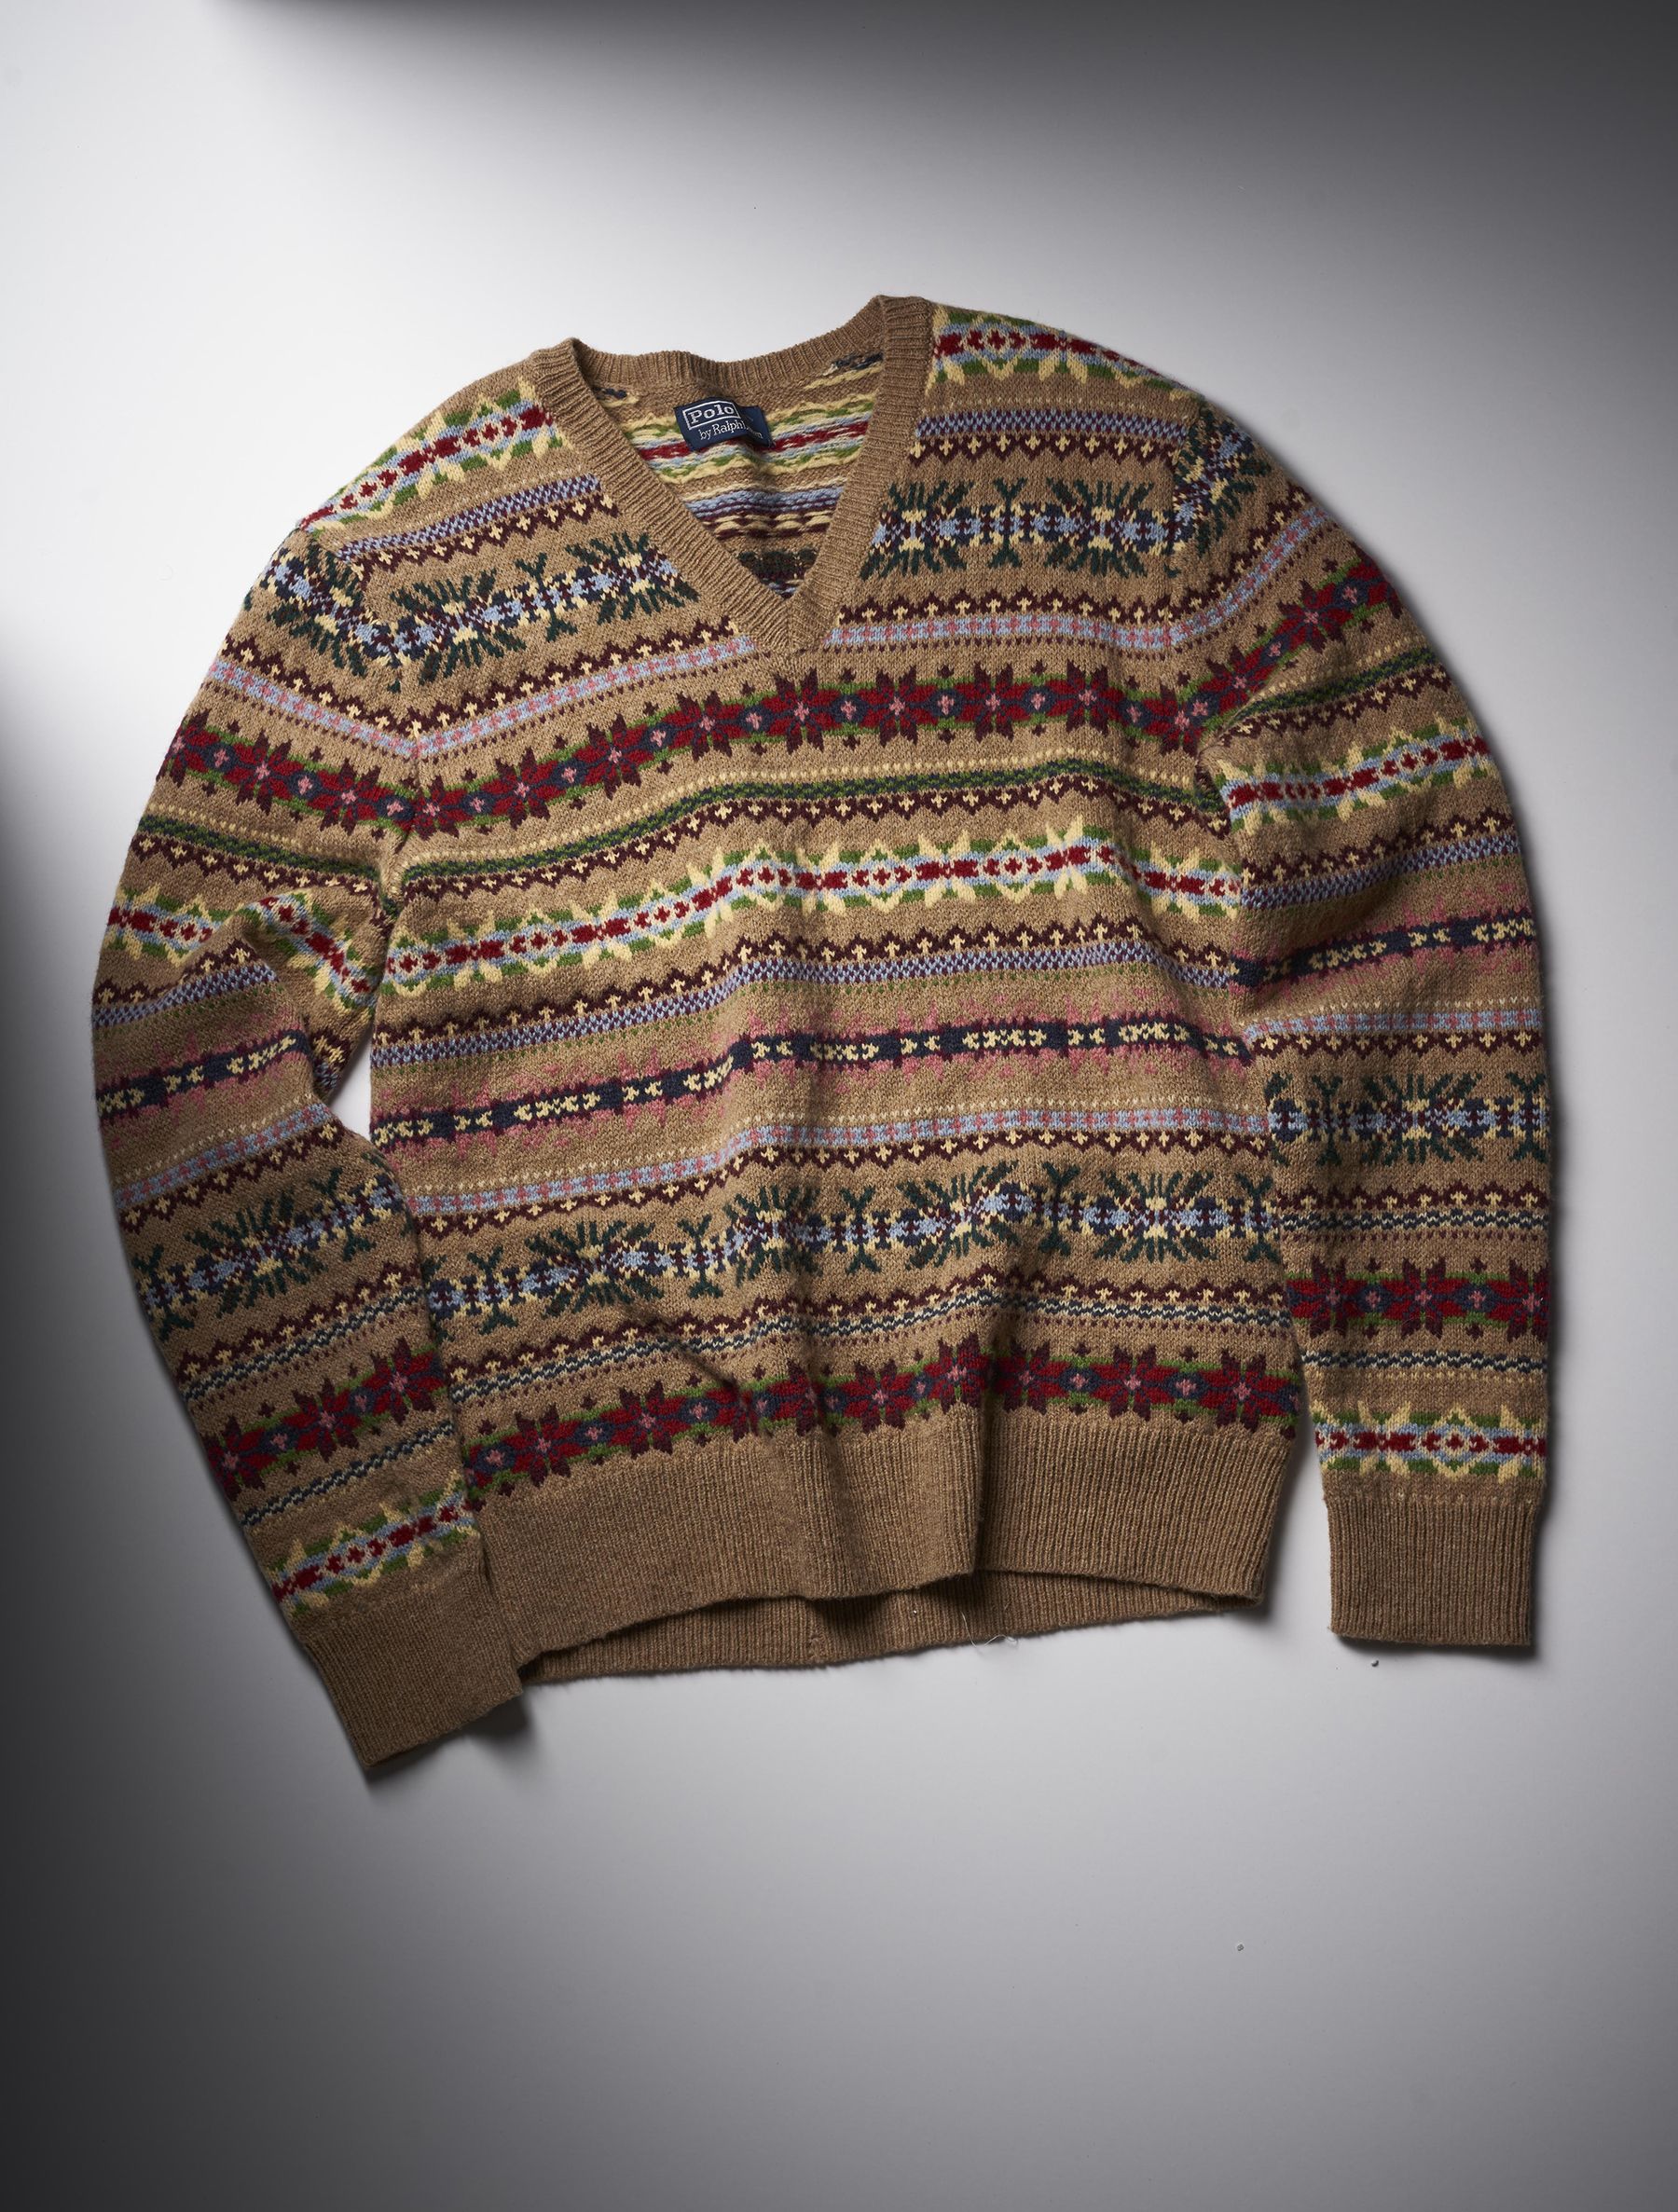 The surprising history of the Fair Isle sweater